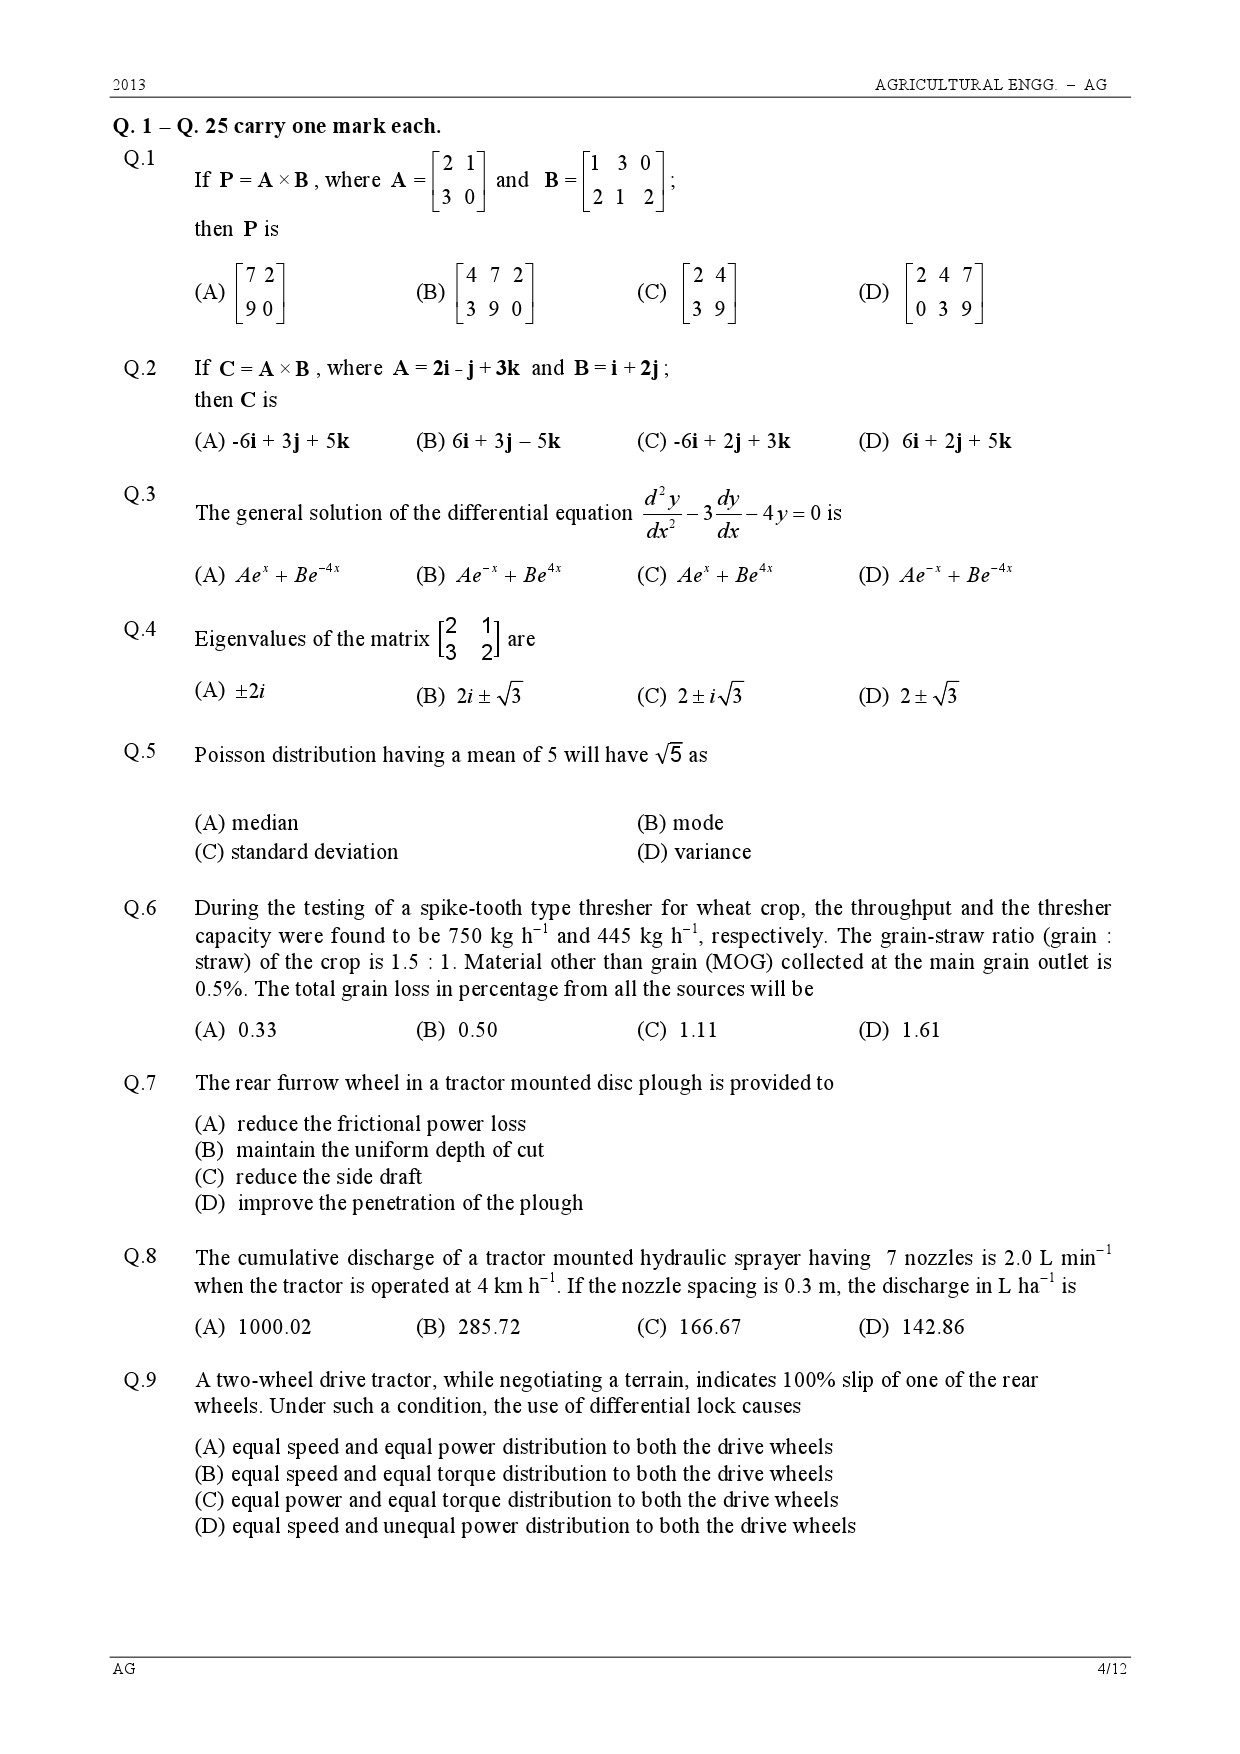 GATE Exam Question Paper 2013 Agricultural Engineering 4